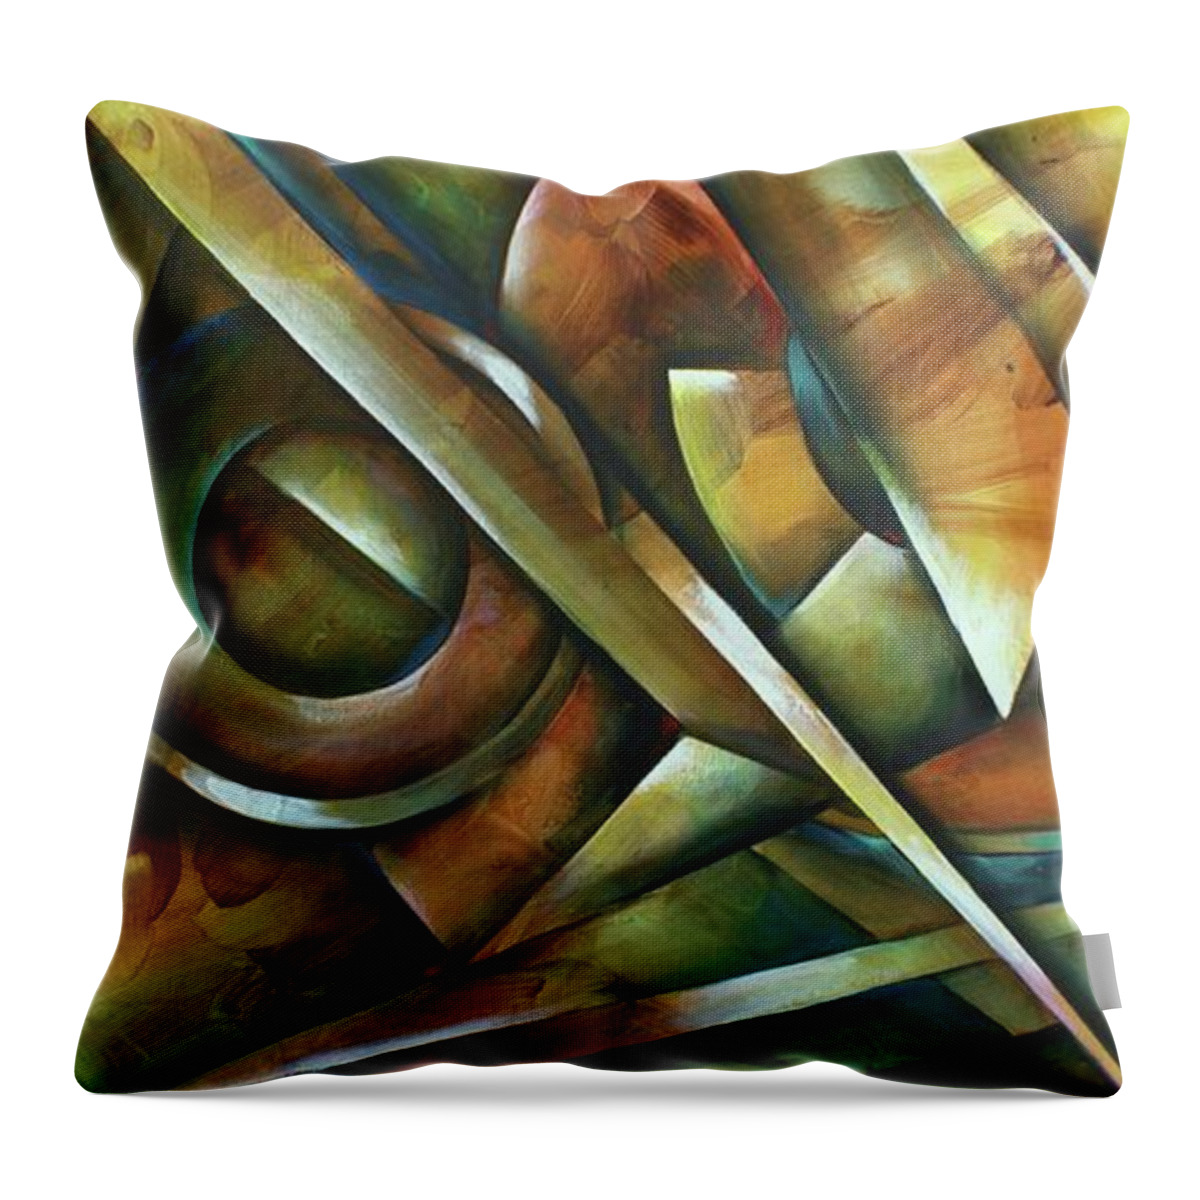 Geometric Throw Pillow featuring the painting Edges by Michael Lang